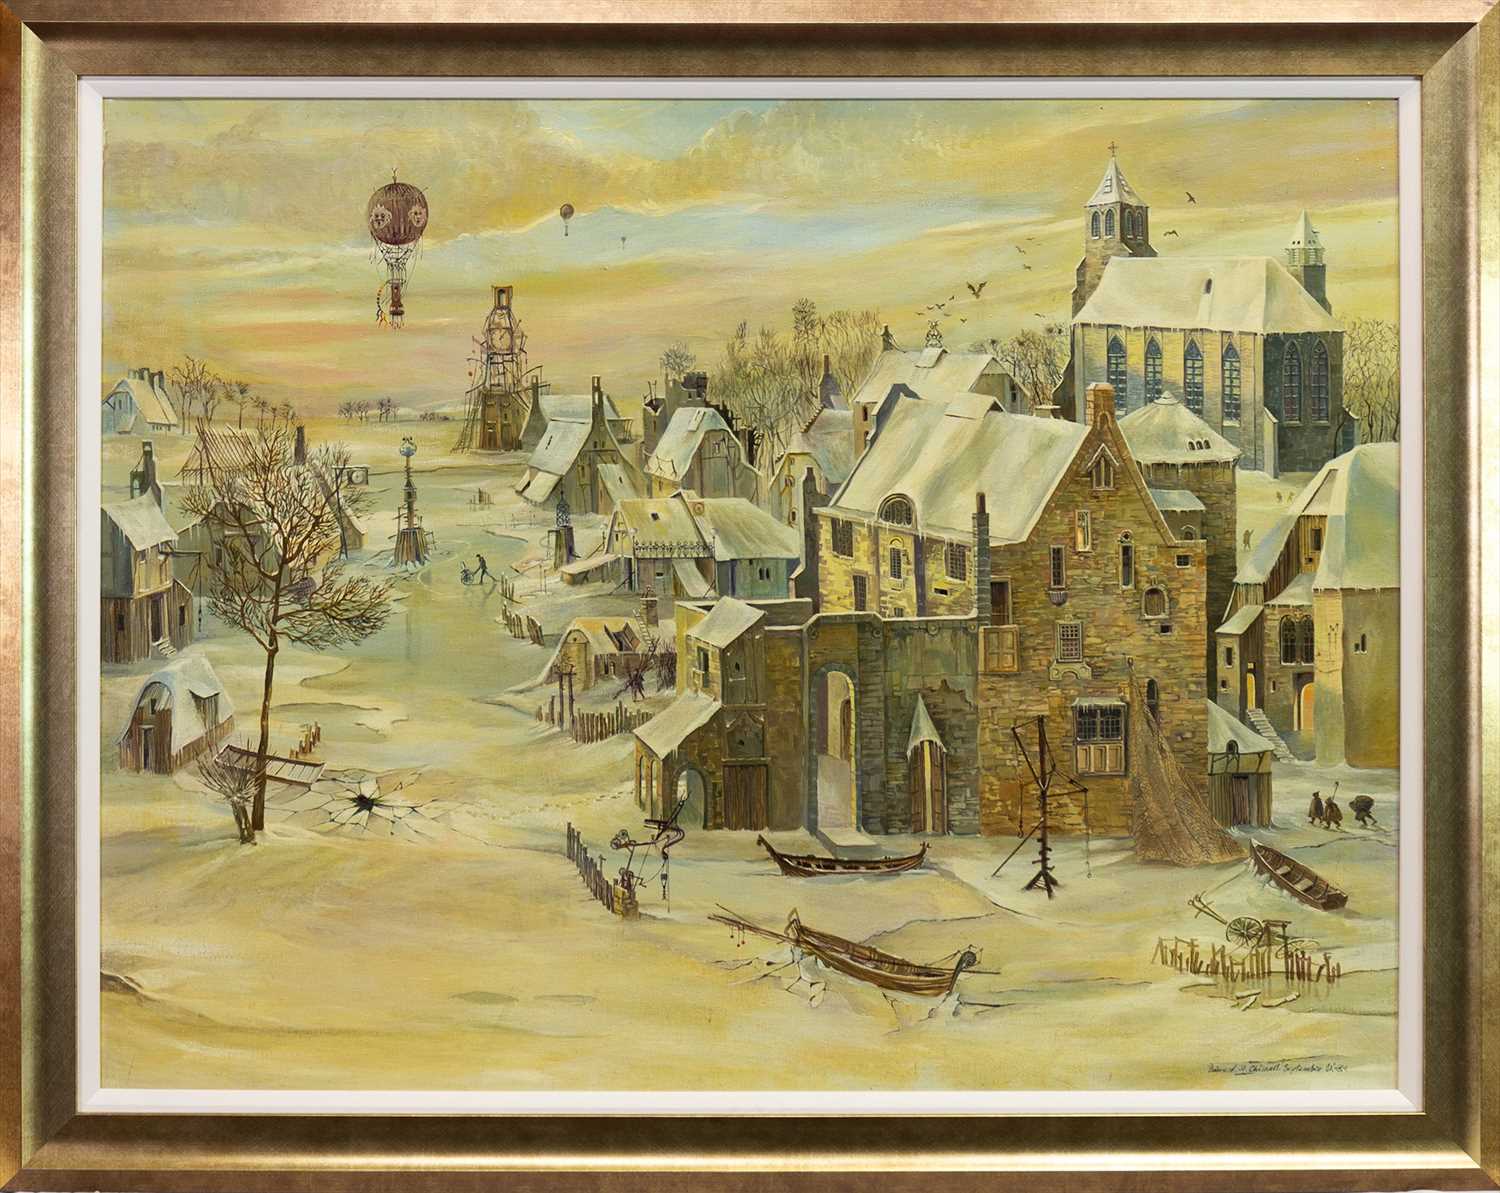 Lot 520 - WINTER IS COMING, AN OIL BY EDWARD CHISNALL